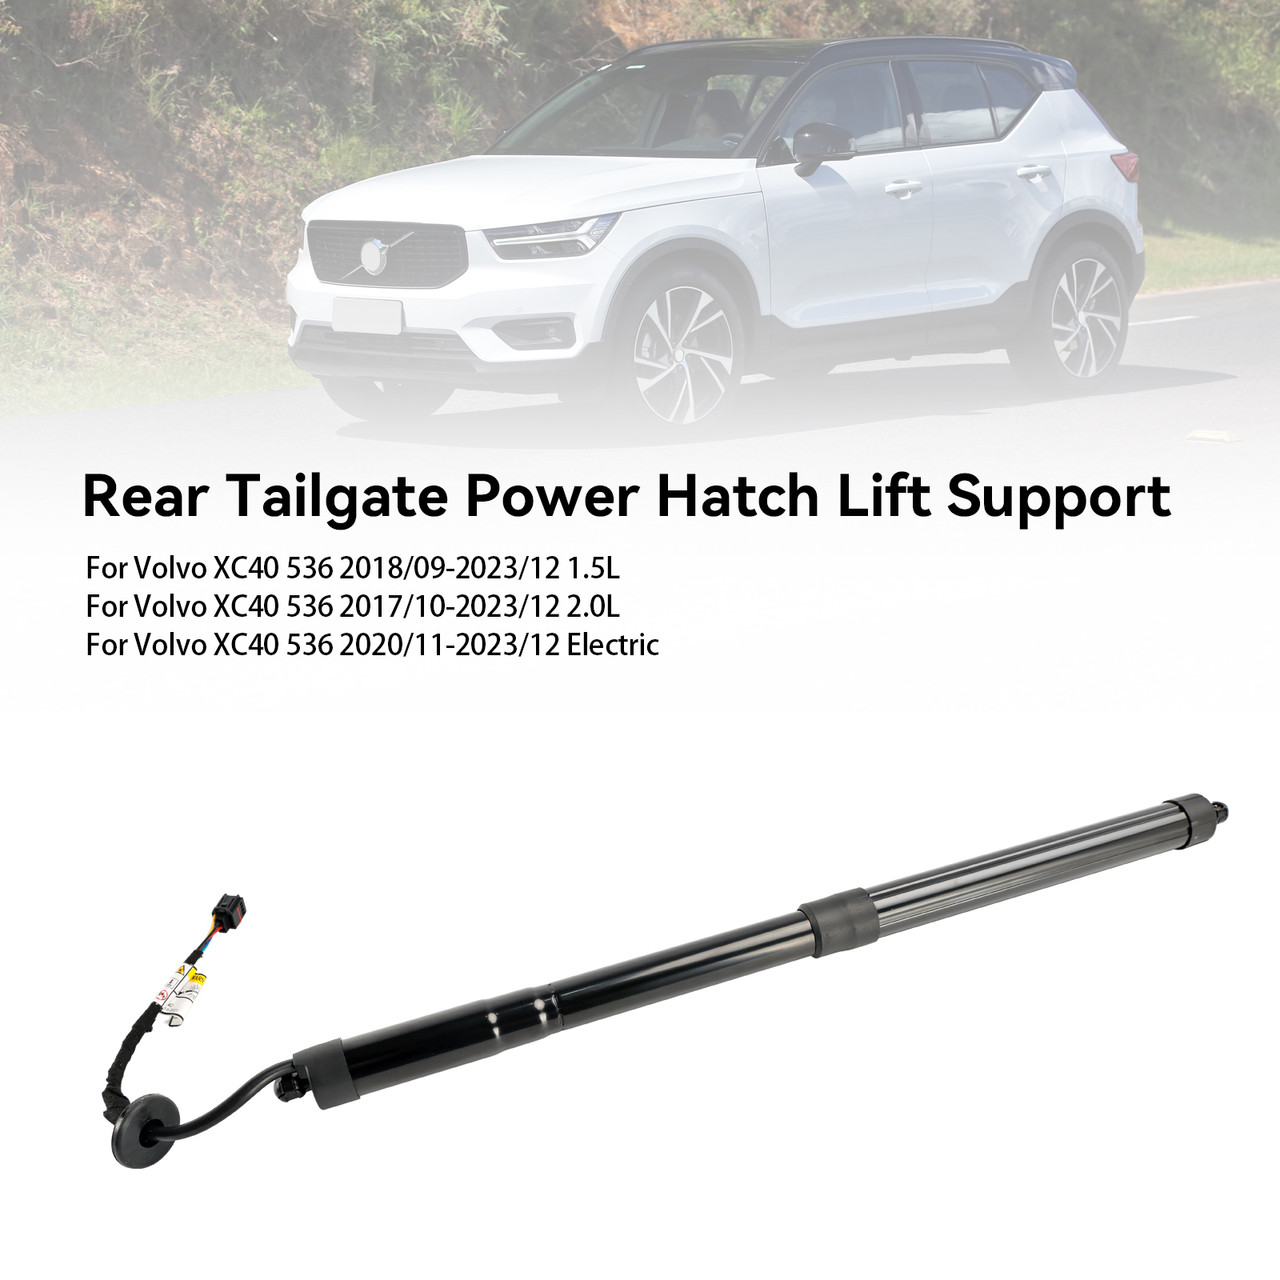 2018/09-2023/12 Volvo XC40 536 1.5L right Rear Tailgate Power Hatch Lift Support 32296297 black Generic